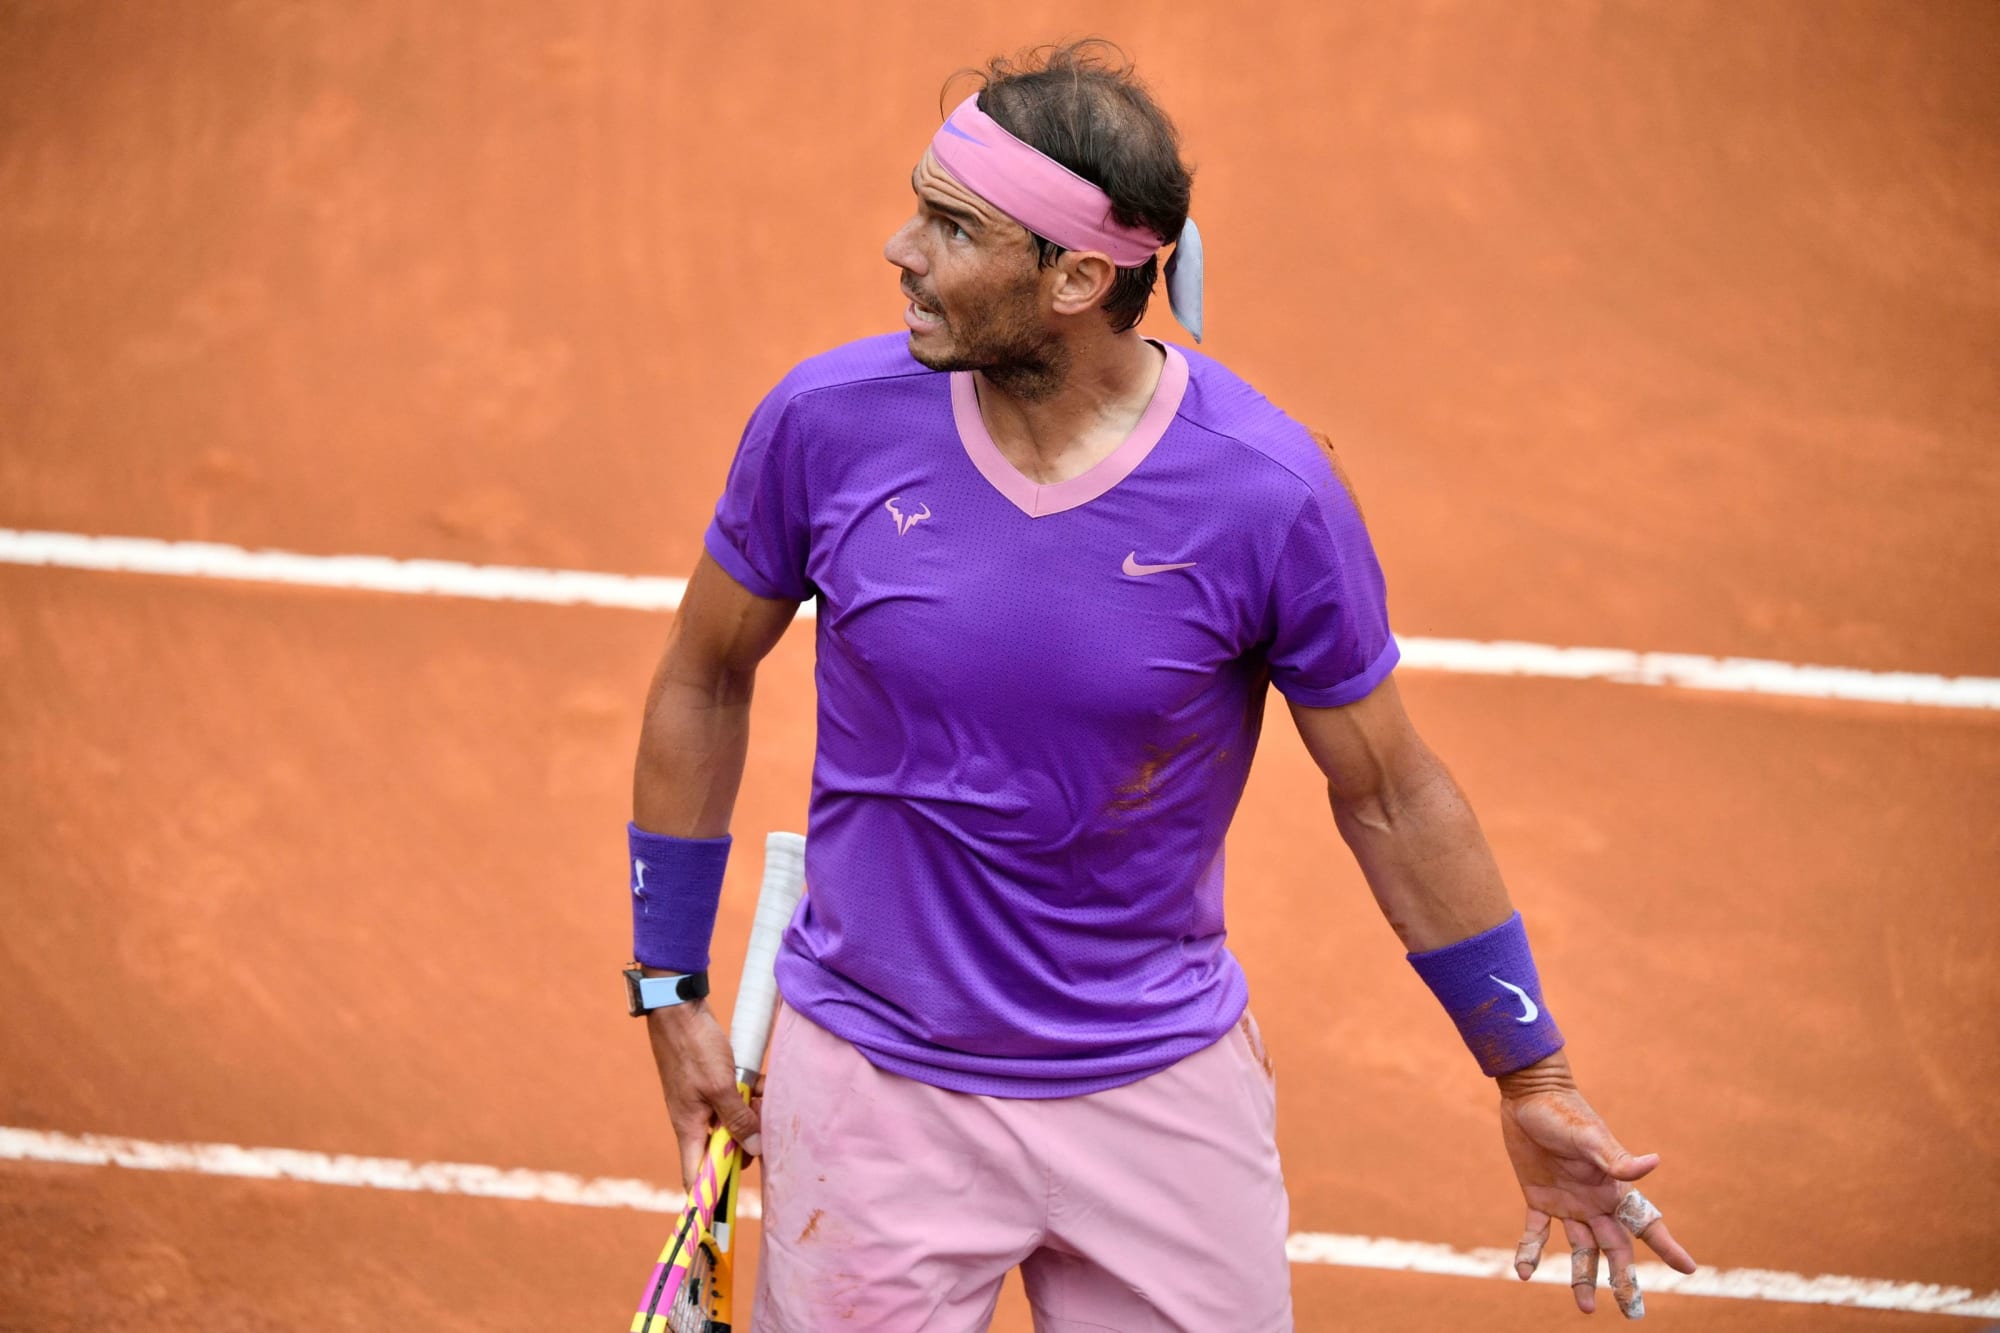 Why Rafa Nadal Will Not Win The French Open In 2021